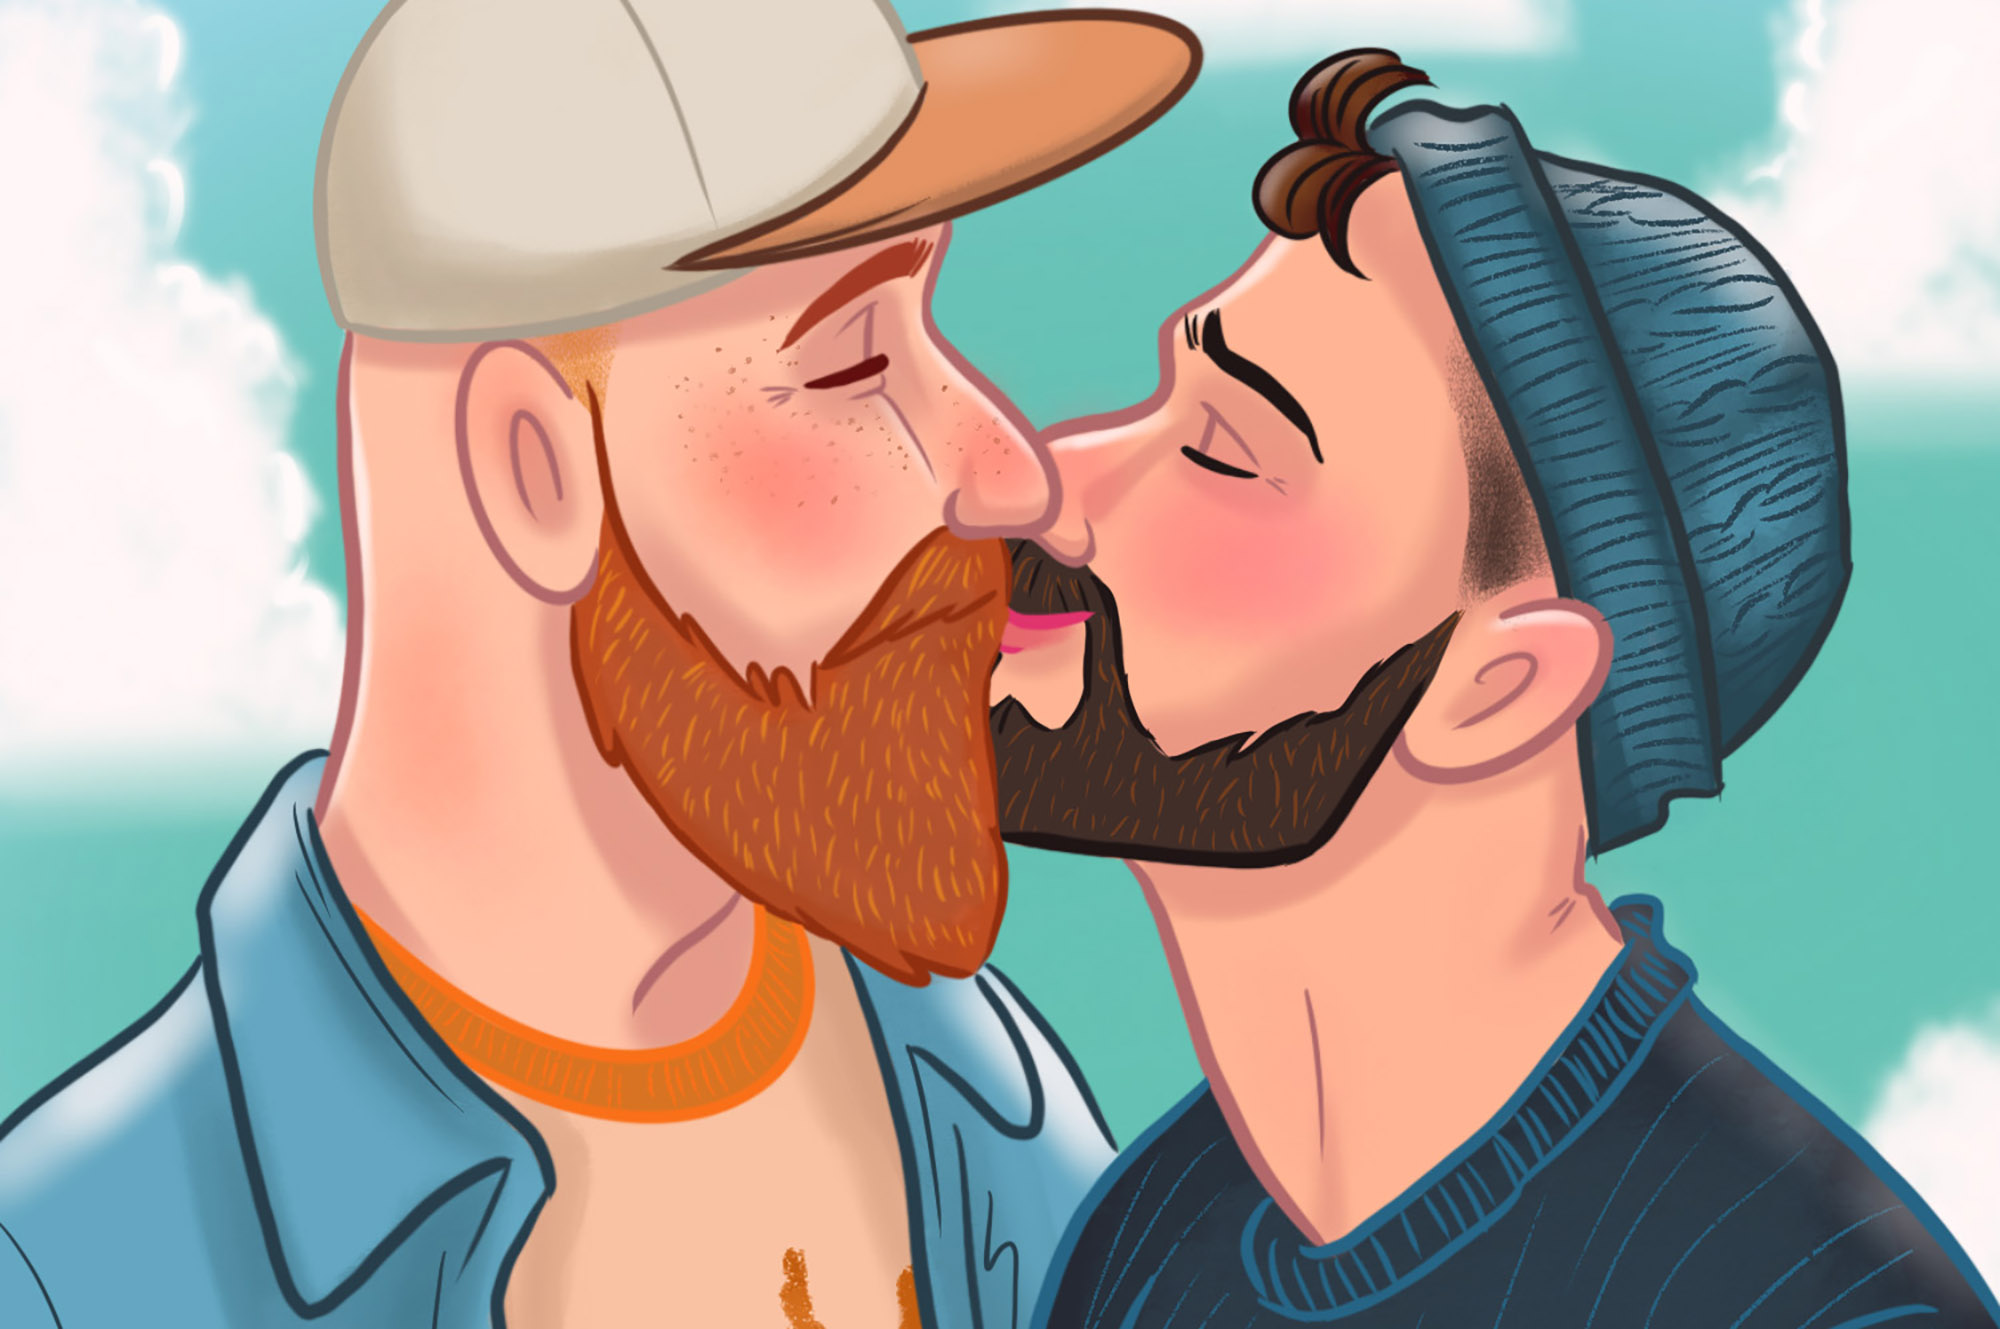 Gay ArtWork of Instagram: our favorite art pieces of Couple of Men